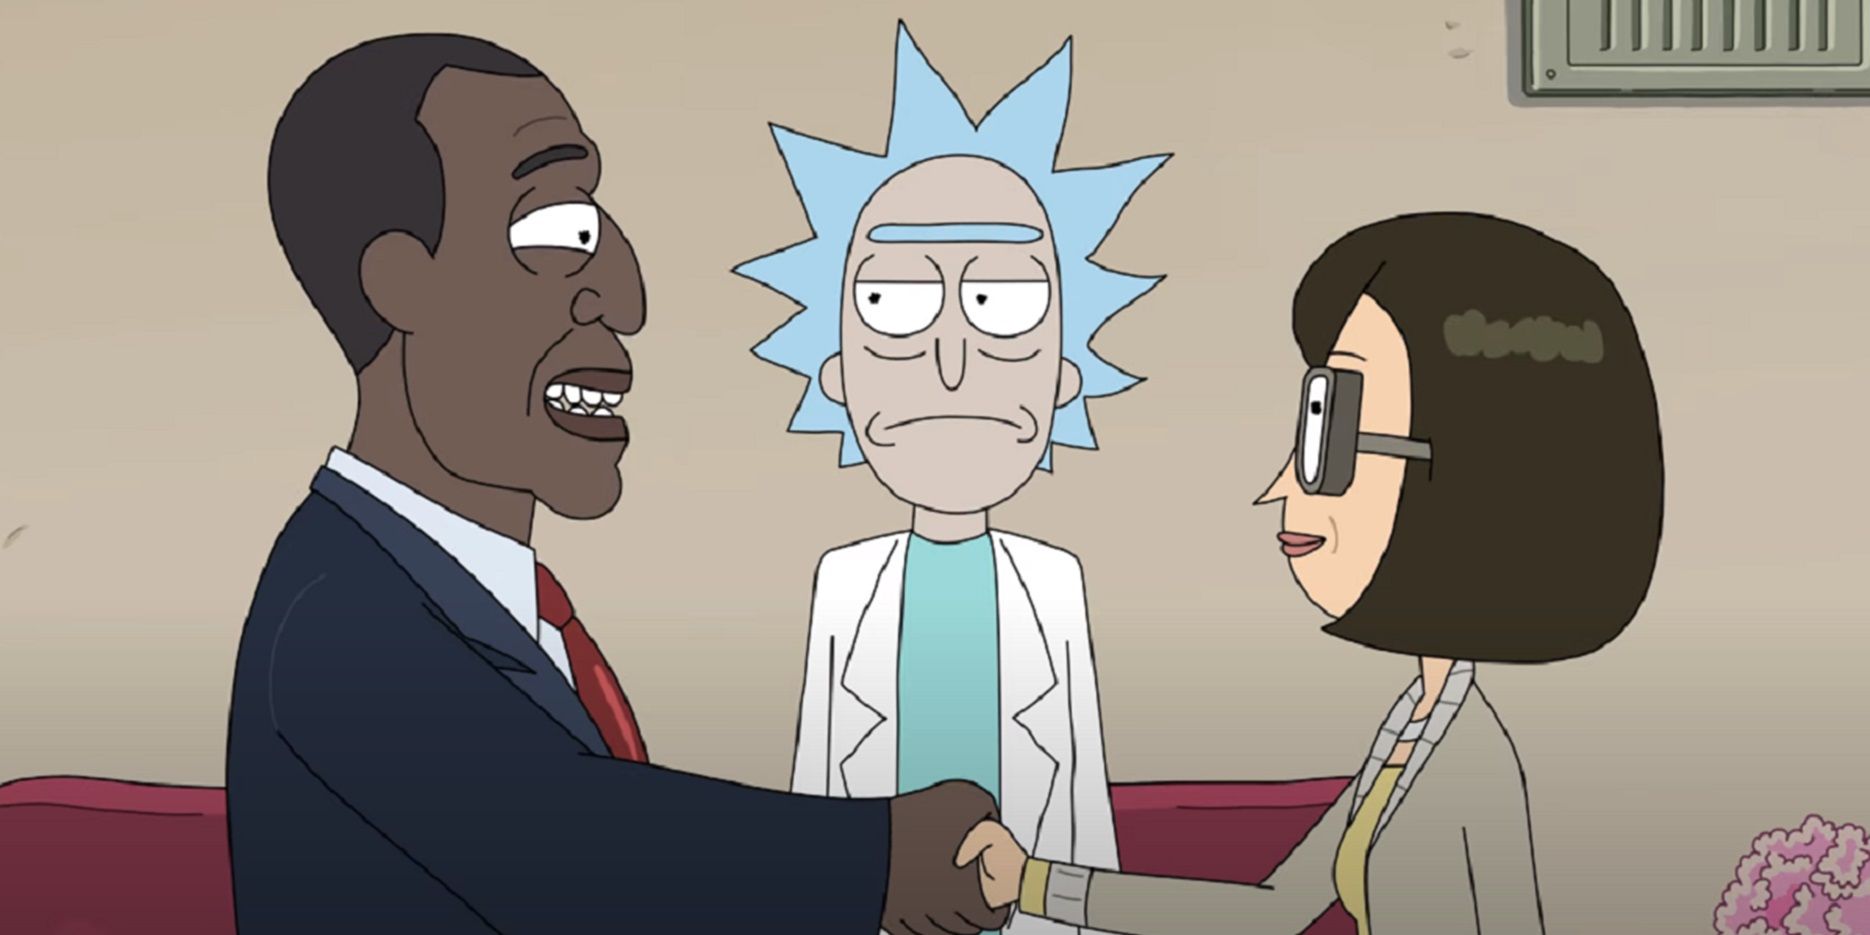 President Curtis meets Dr Wong in Rick and Morty